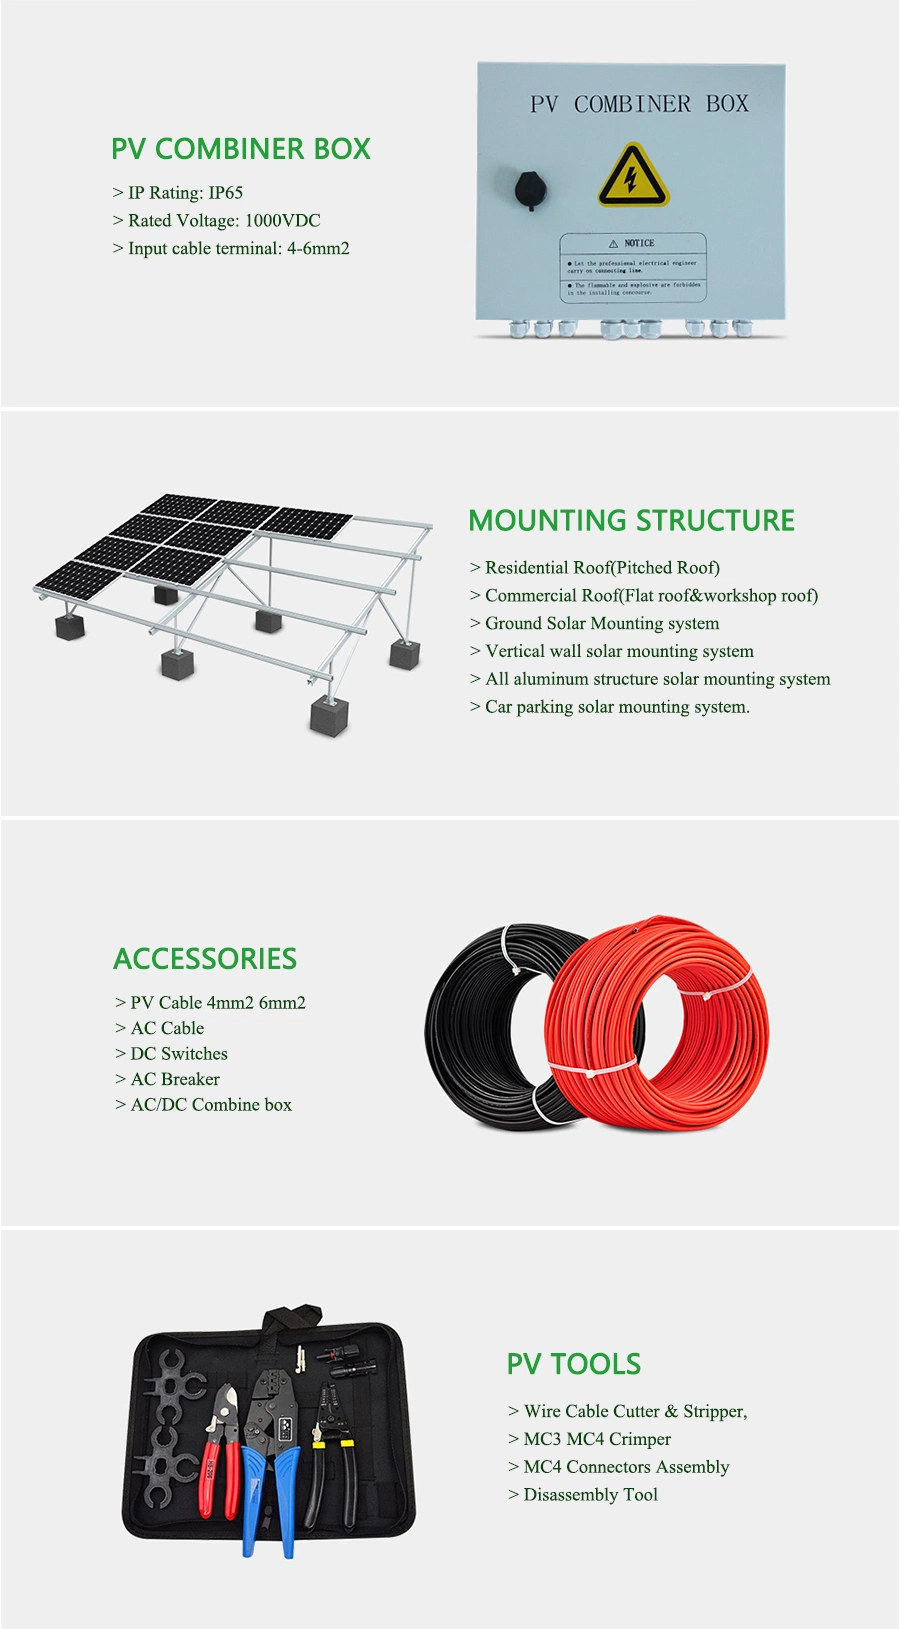 Factory Sales on Grid off Grid Roof Mounting Ground Mounting 10kw 20kw 30kw 50kw Solar System